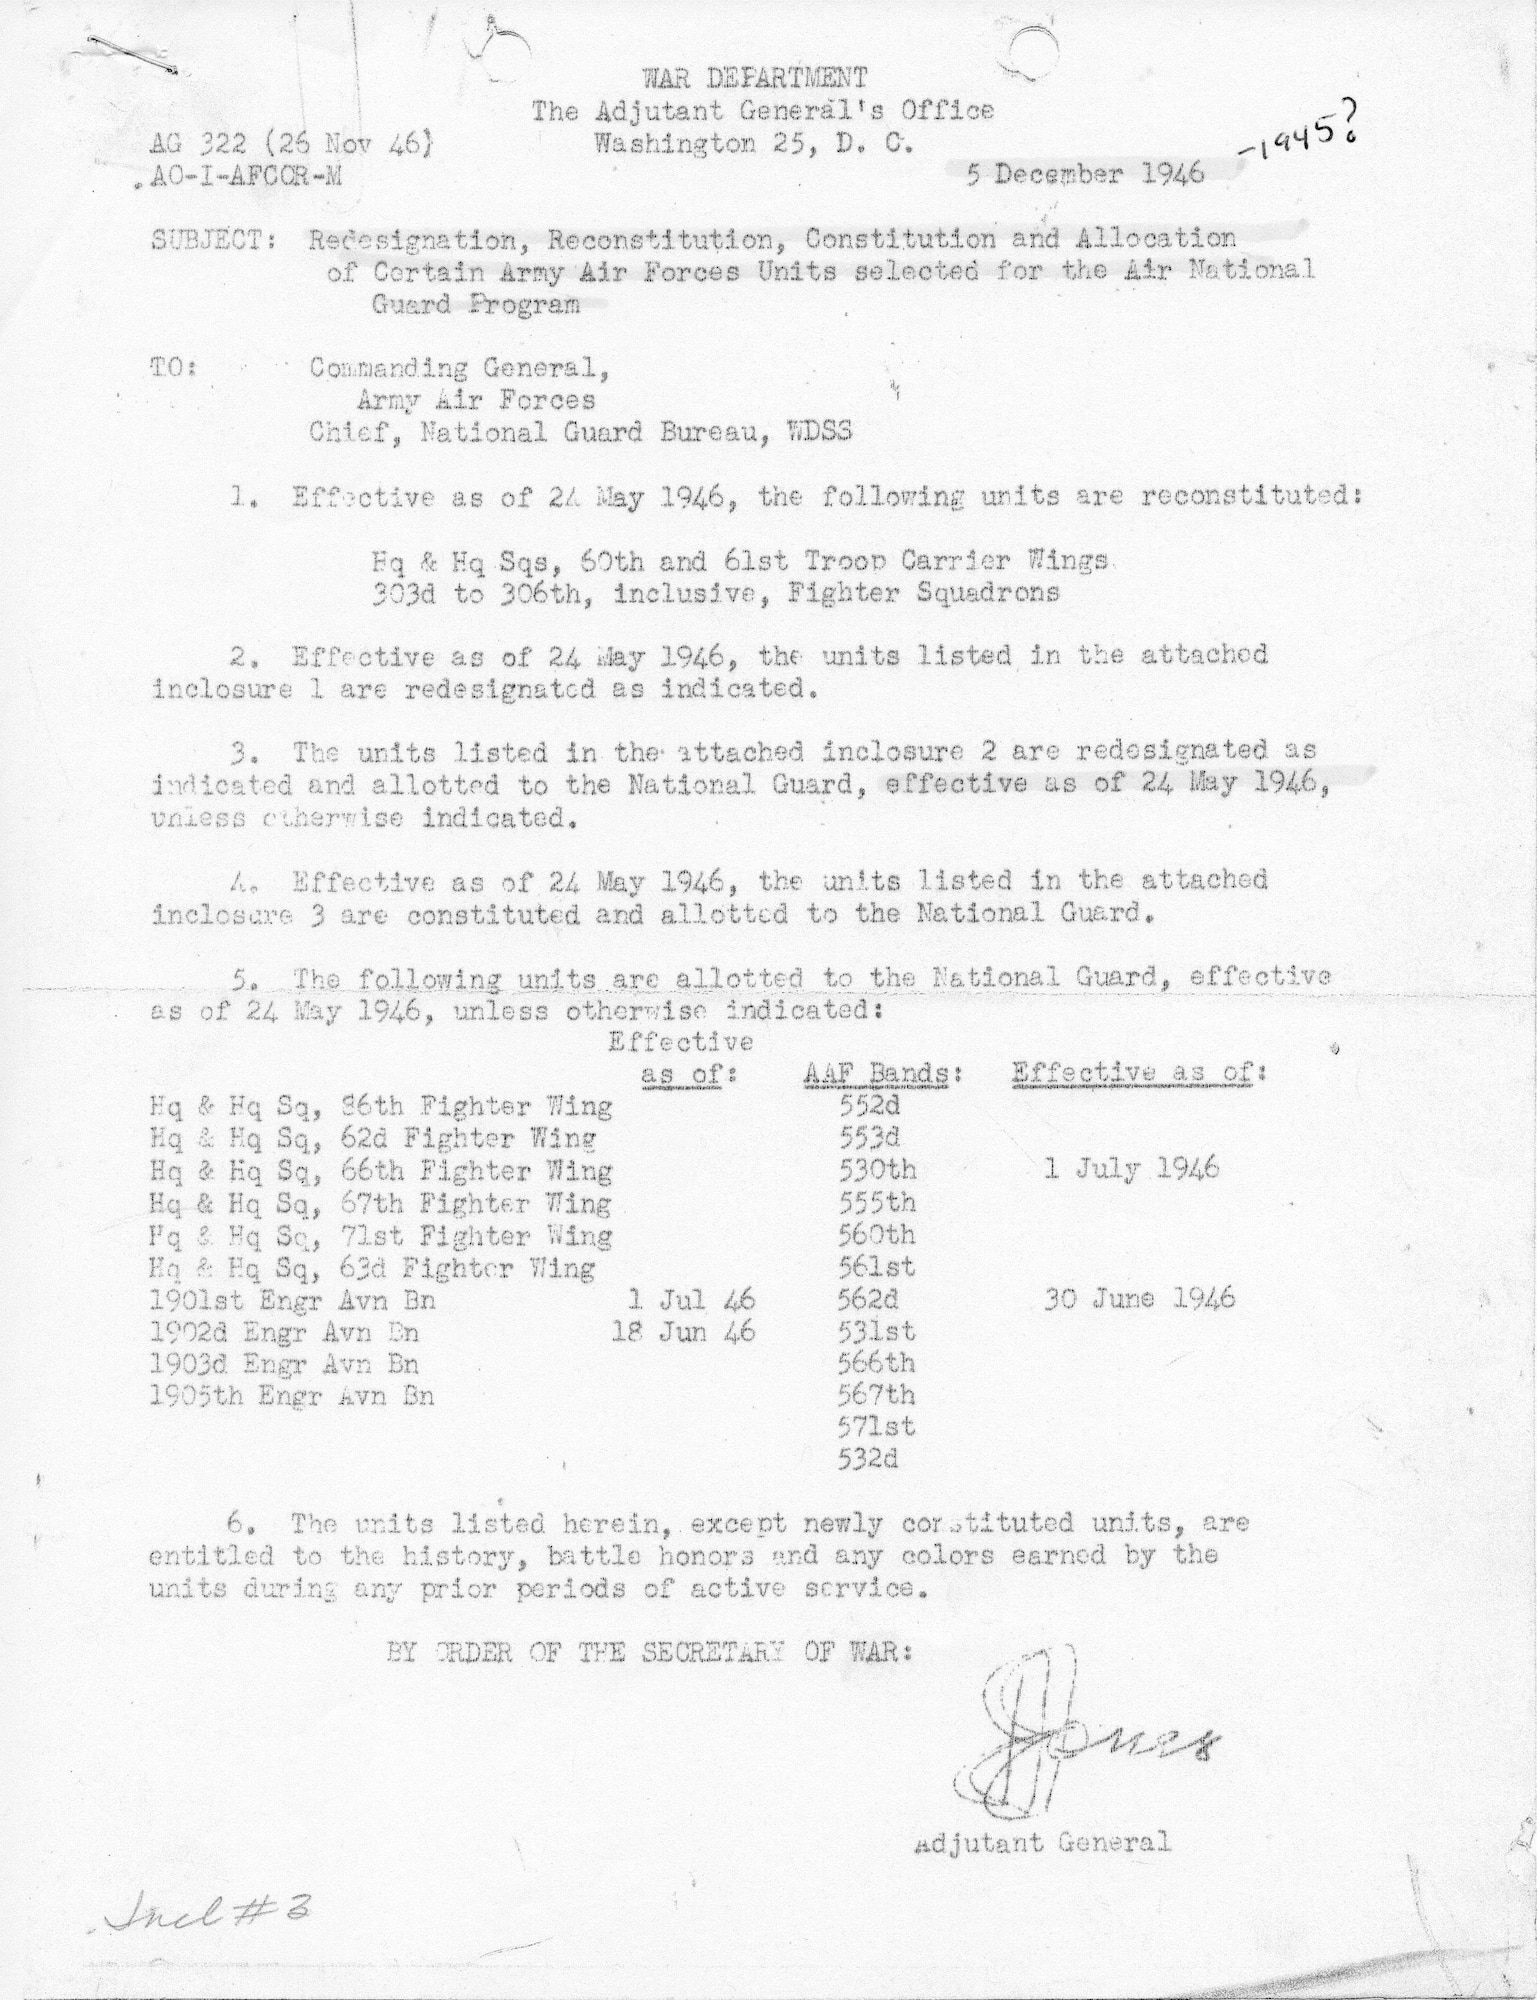 This War Department’s order of 5 December 1946 reflects the postwar buildup of the air units of the National Guard via unit reconstitution, unit redesignation and original unit constitution.  It authorized the redesignated units to retain their history and battle honors earned in prior service.  This action to augment the National Guard was a major initiative in the creation of an improved air reserve component capability after World War II, and affected most if not all National Guard air units across the country.  (142FW History Archives)